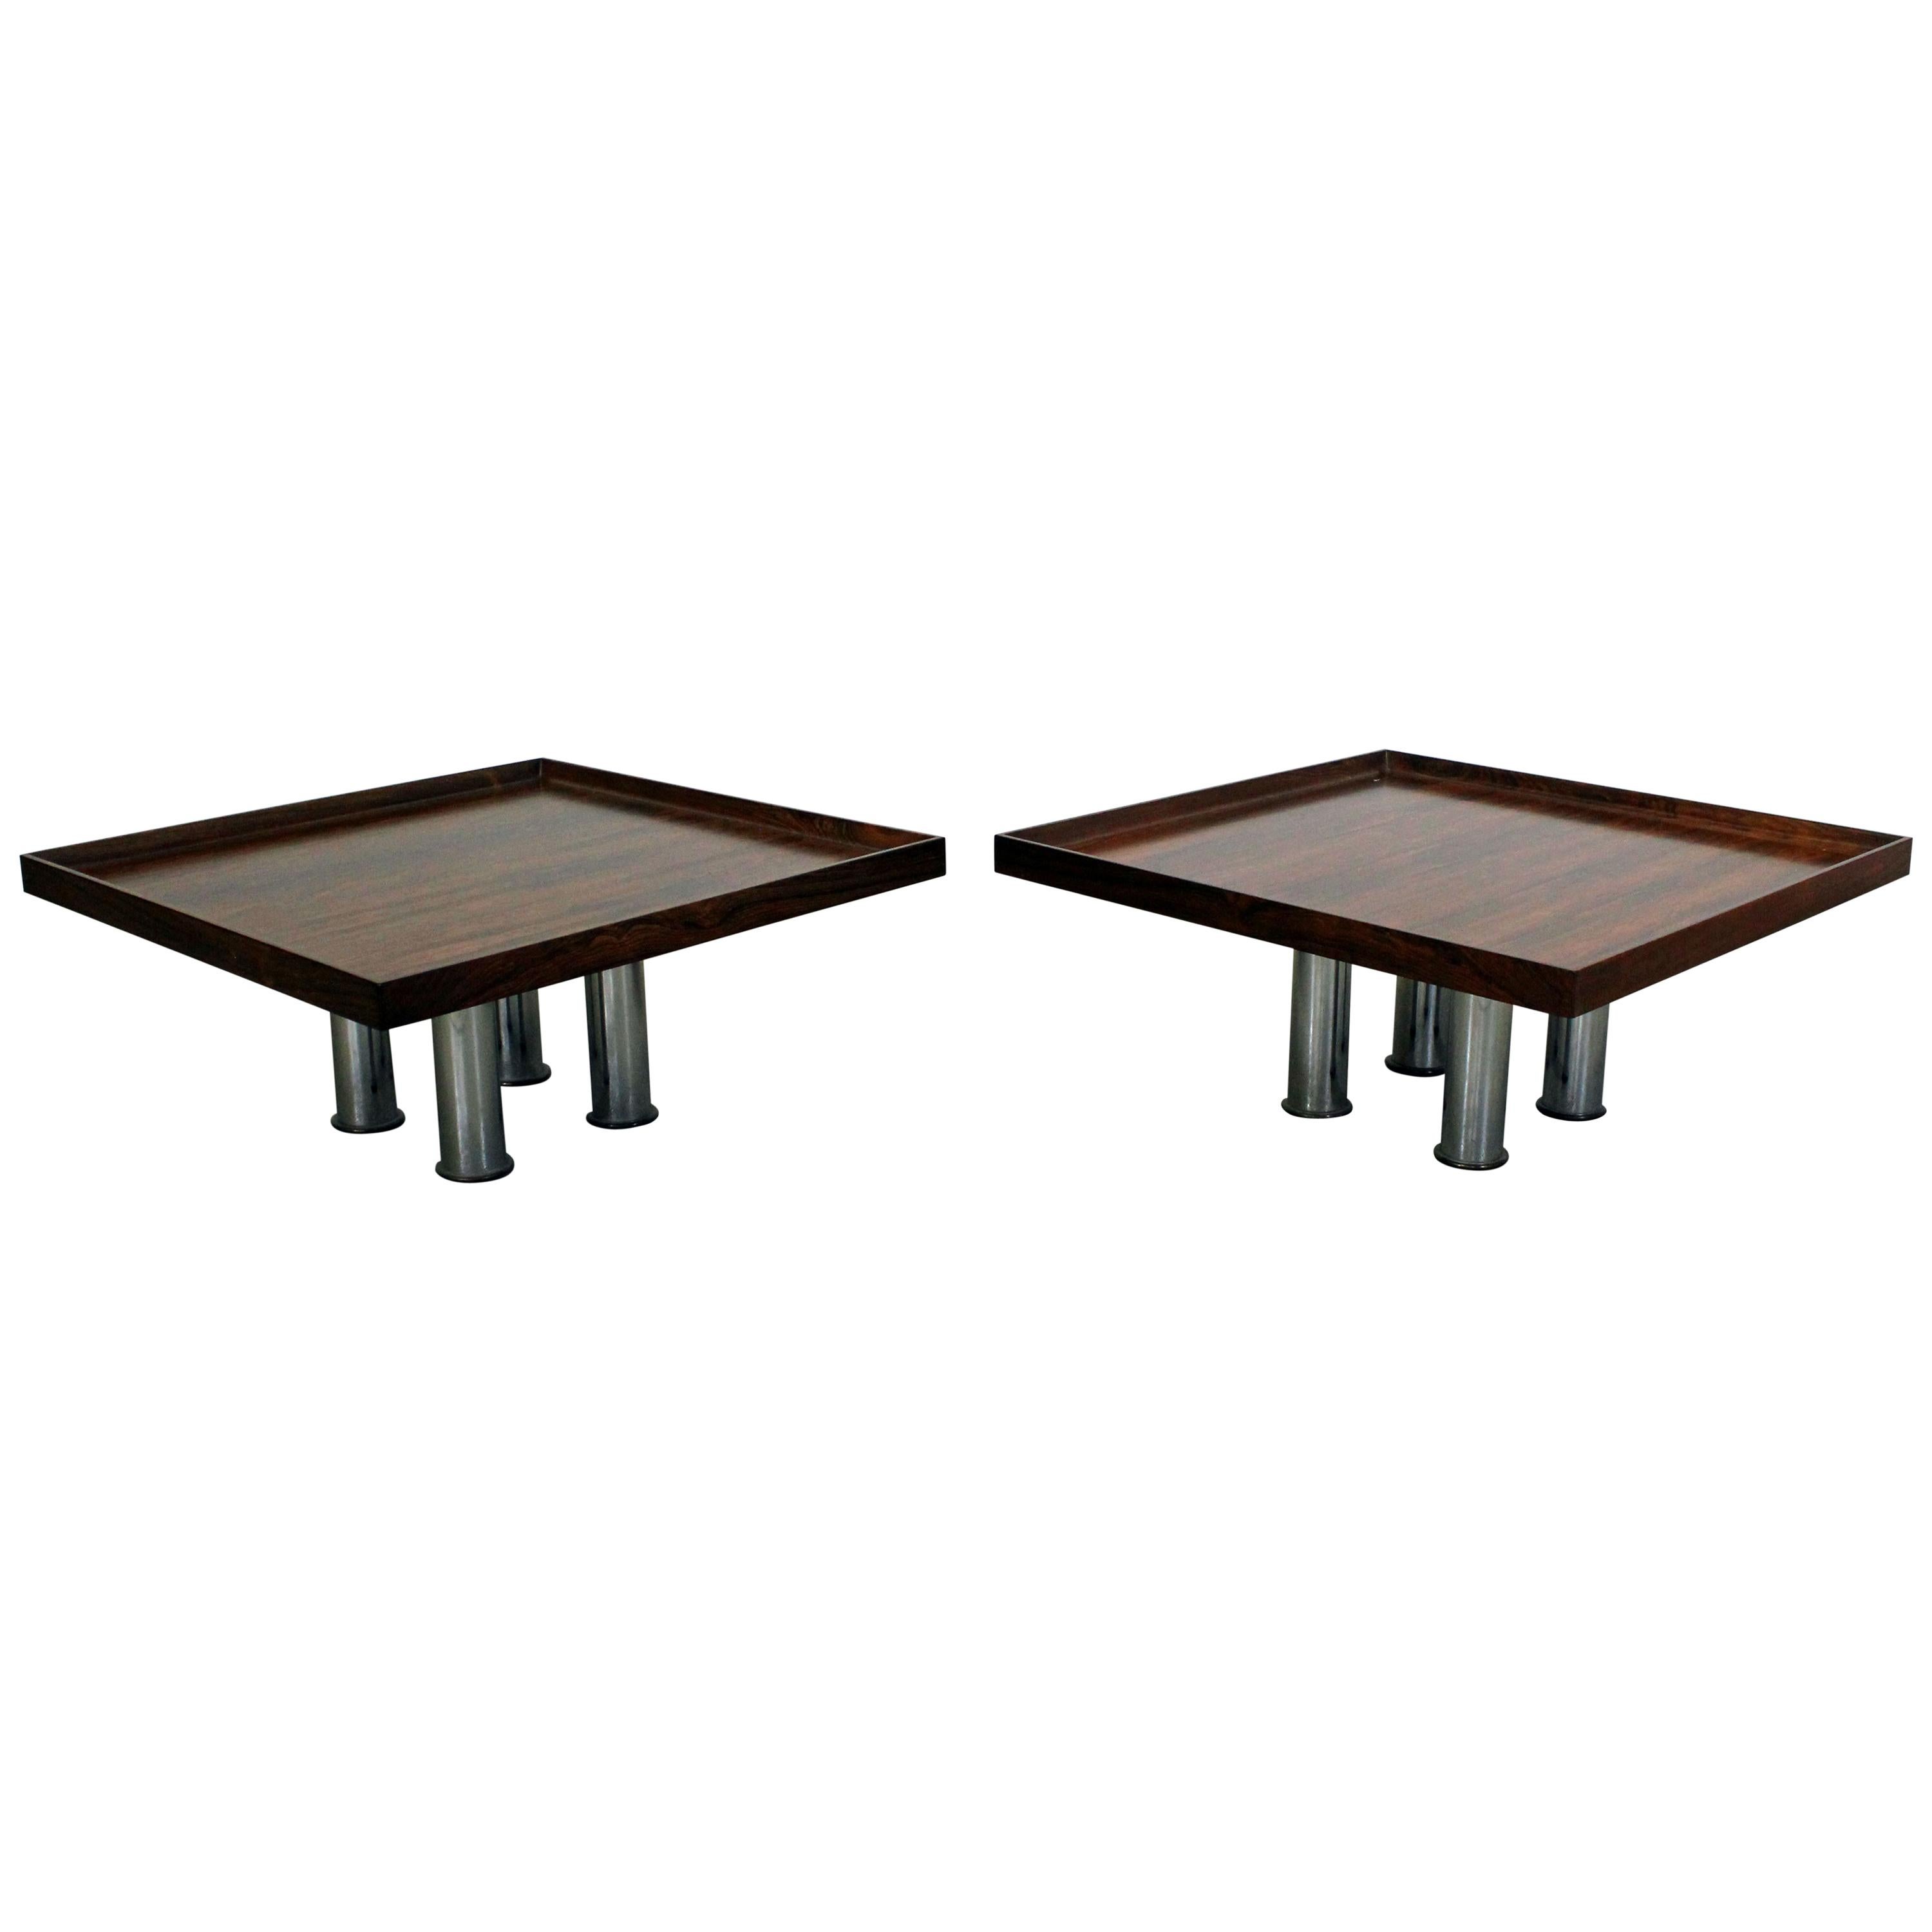 Pair of Midcentury Danish Modern Knoll Rosewood Chrome Coffee or End Tables